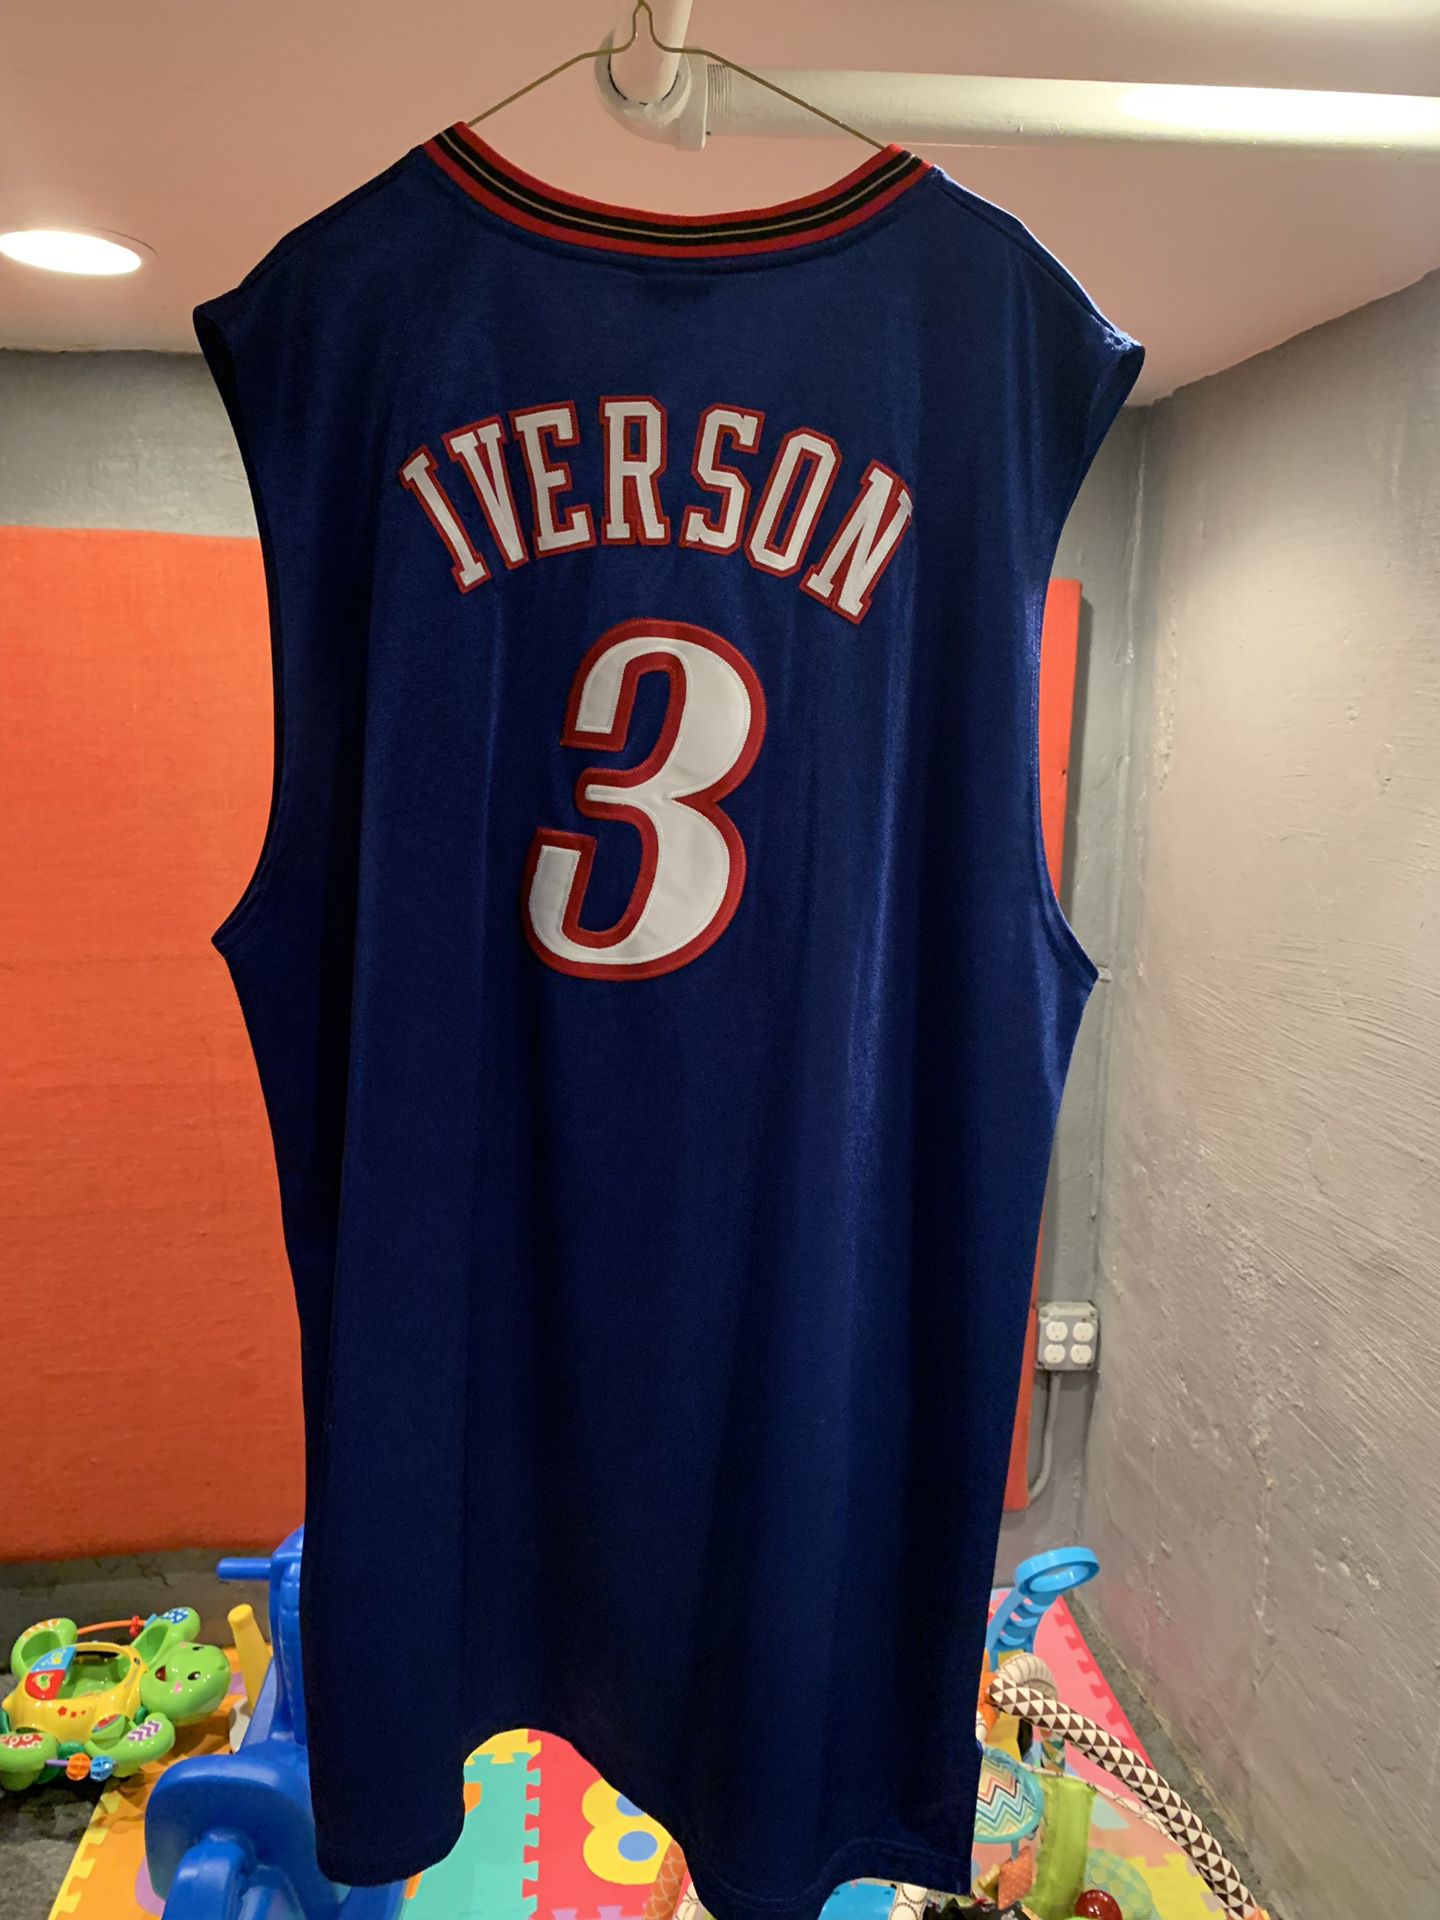 Allen Iverson 76ers Vintage Nike Jersey for Sale in Libertyville, IL -  OfferUp